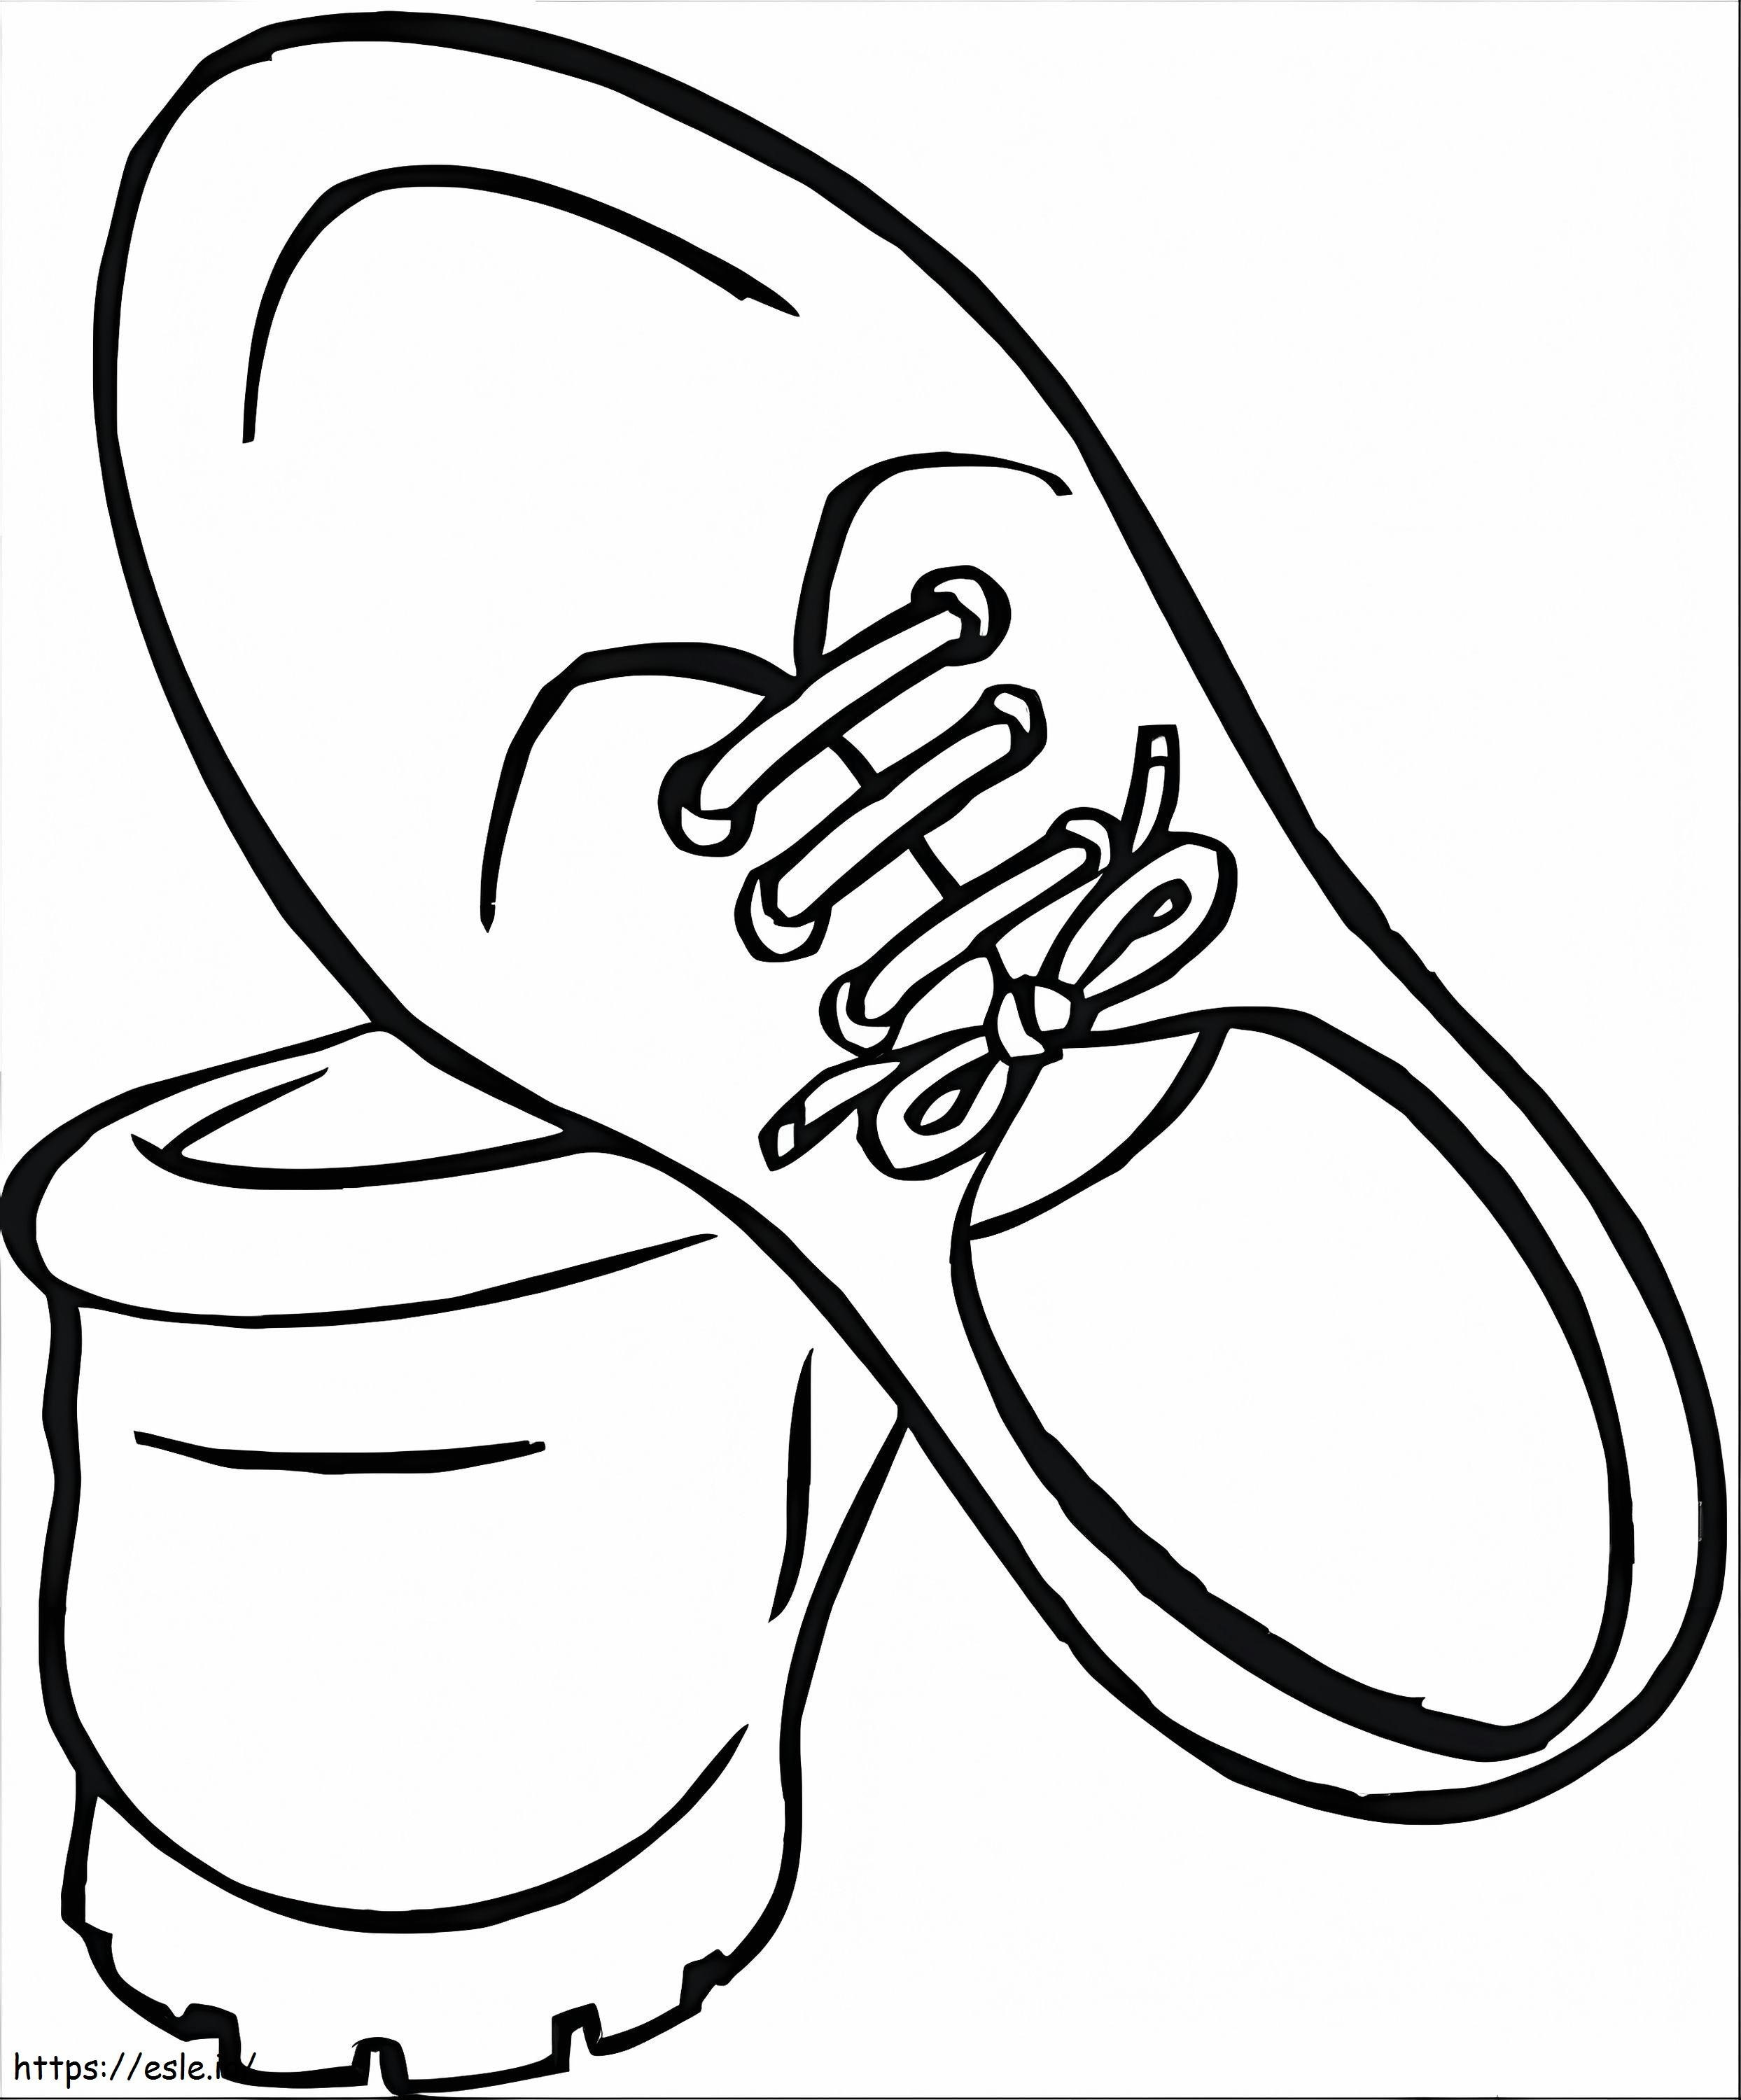 Good Shoes coloring page